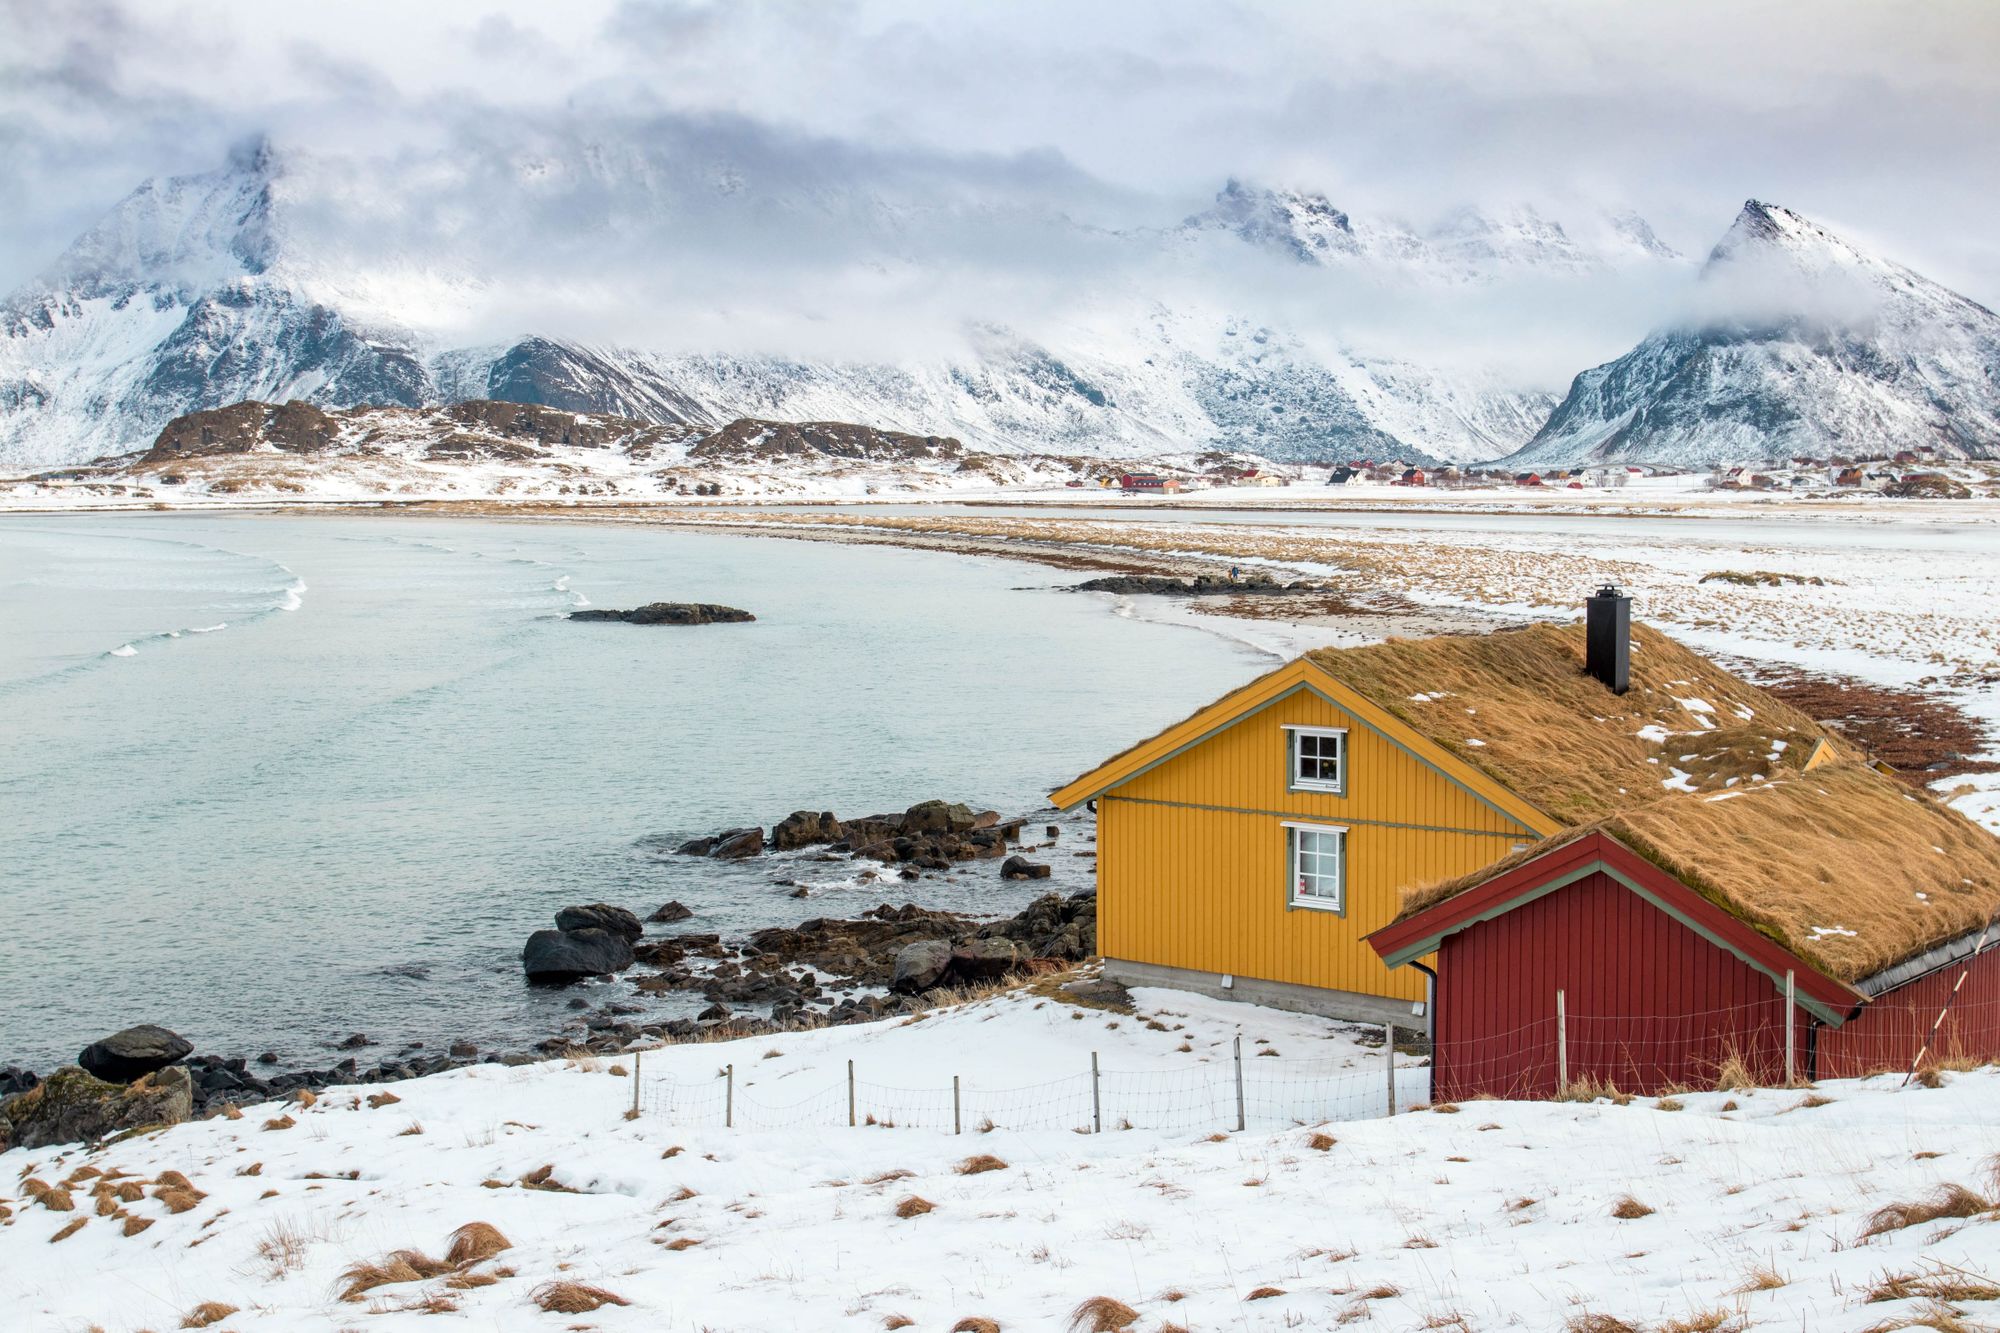 Small, red-painted fisherman's cabins can be found all over Lofoten Islands, known as rorbuer